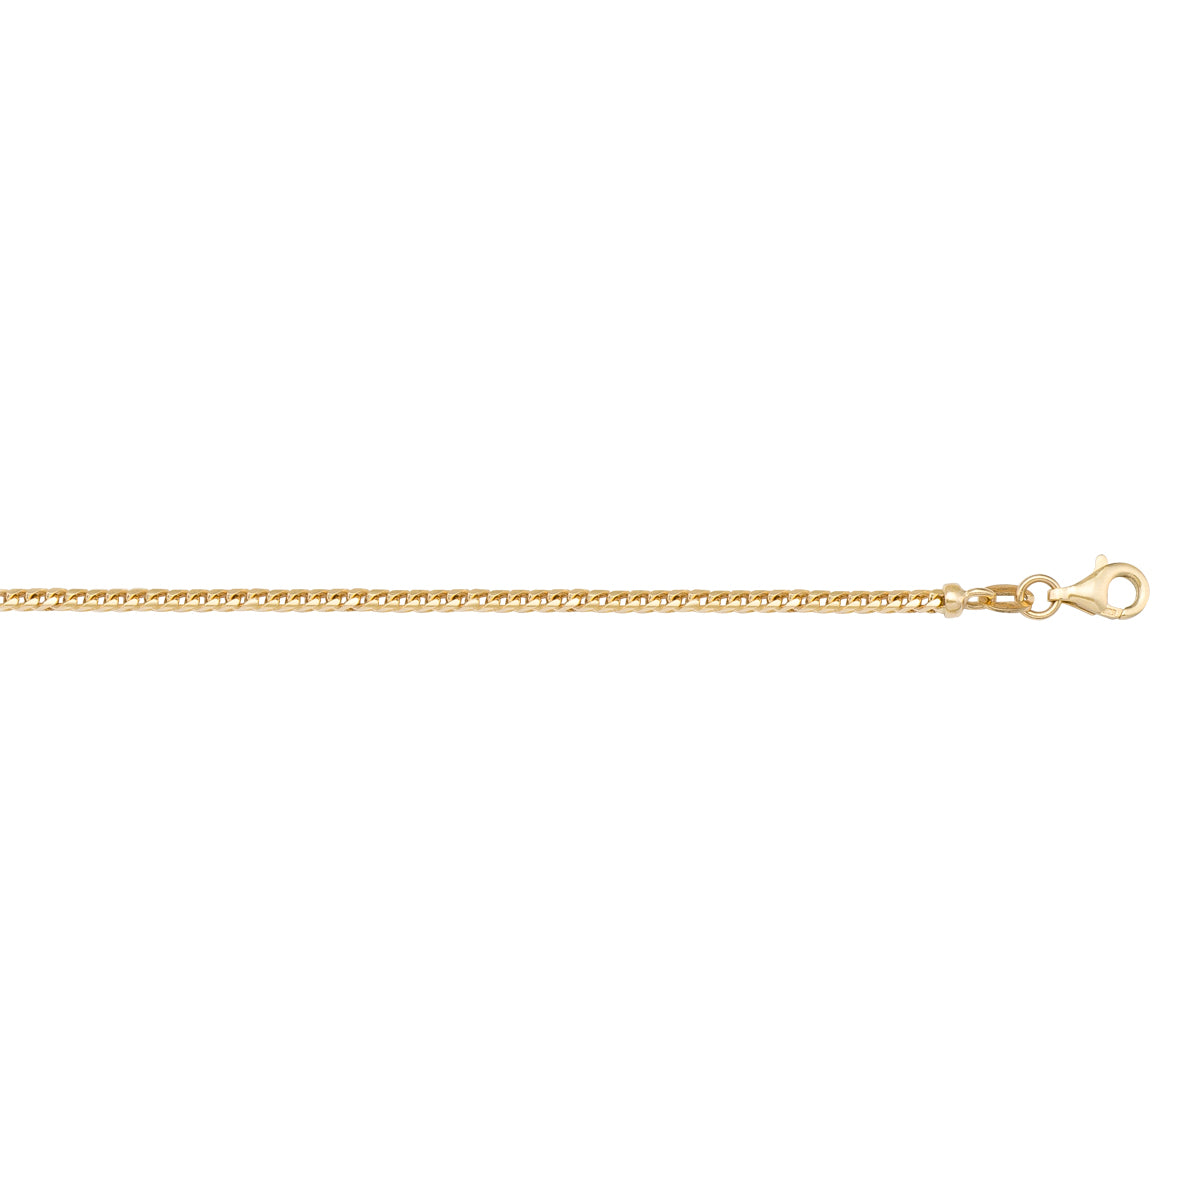 CHAINS YELLOW GOLD SOLID FRANCO LINK 